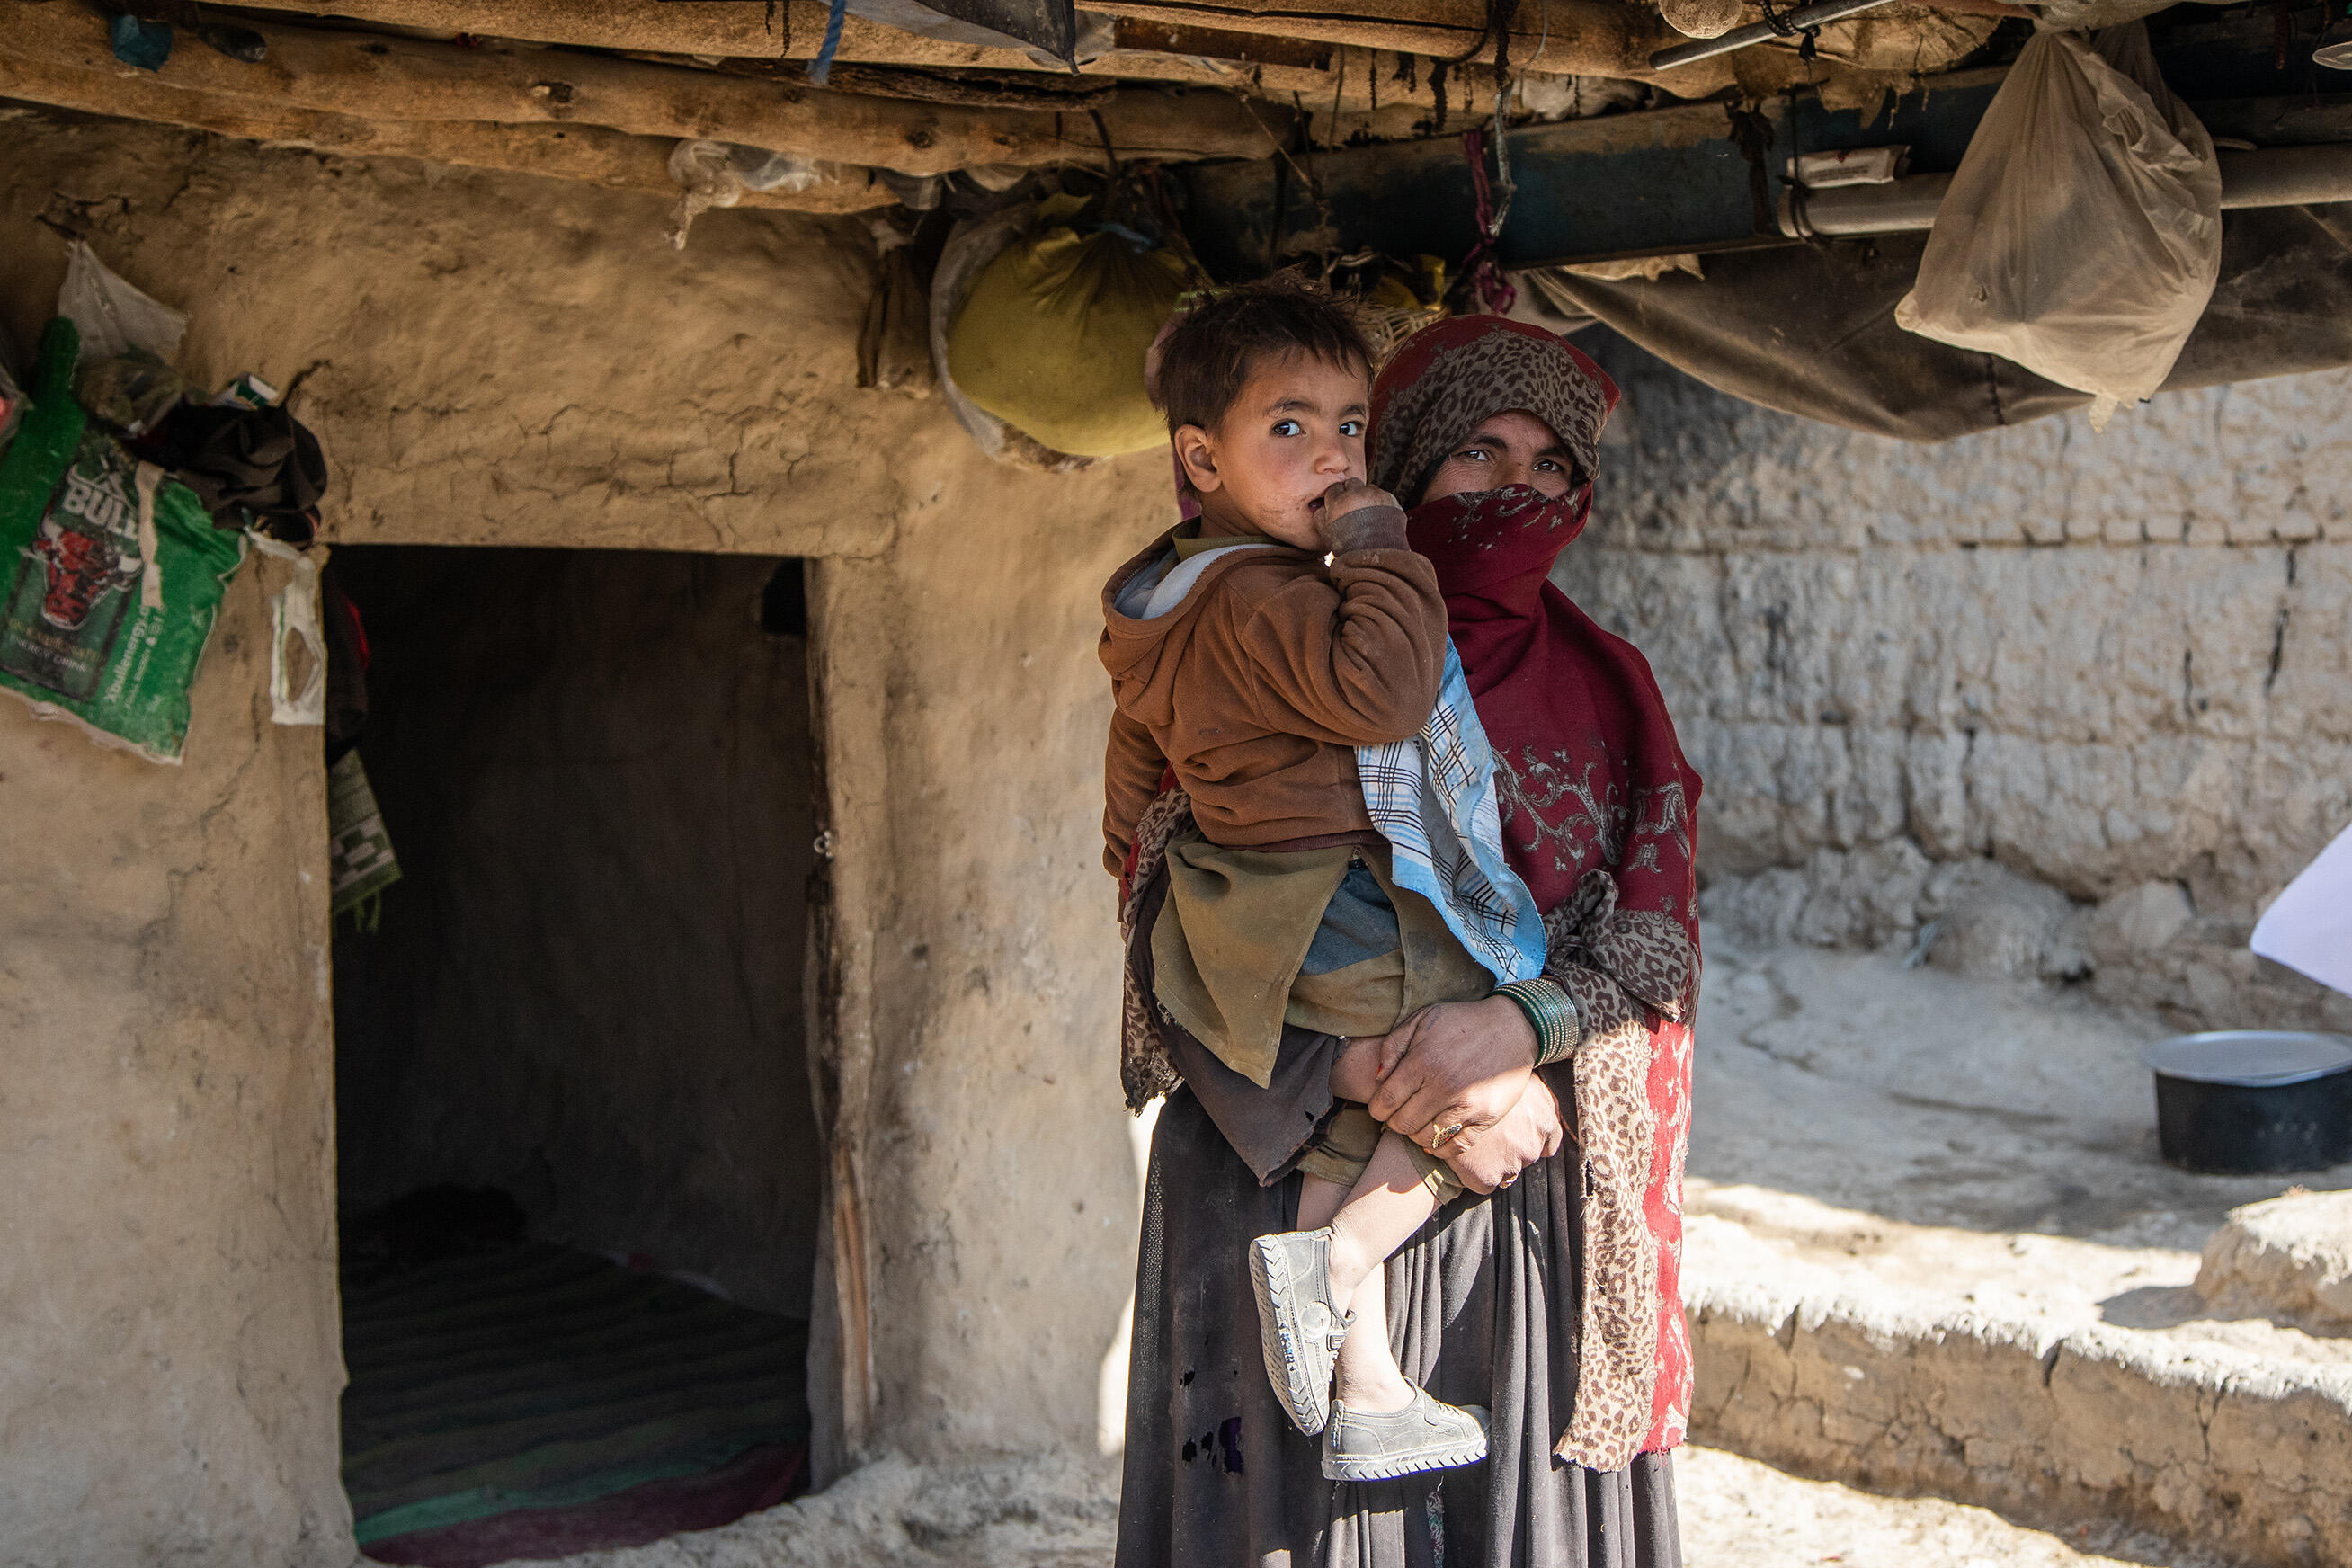 A woman and her child in a camp in Kabul, Afghanistan